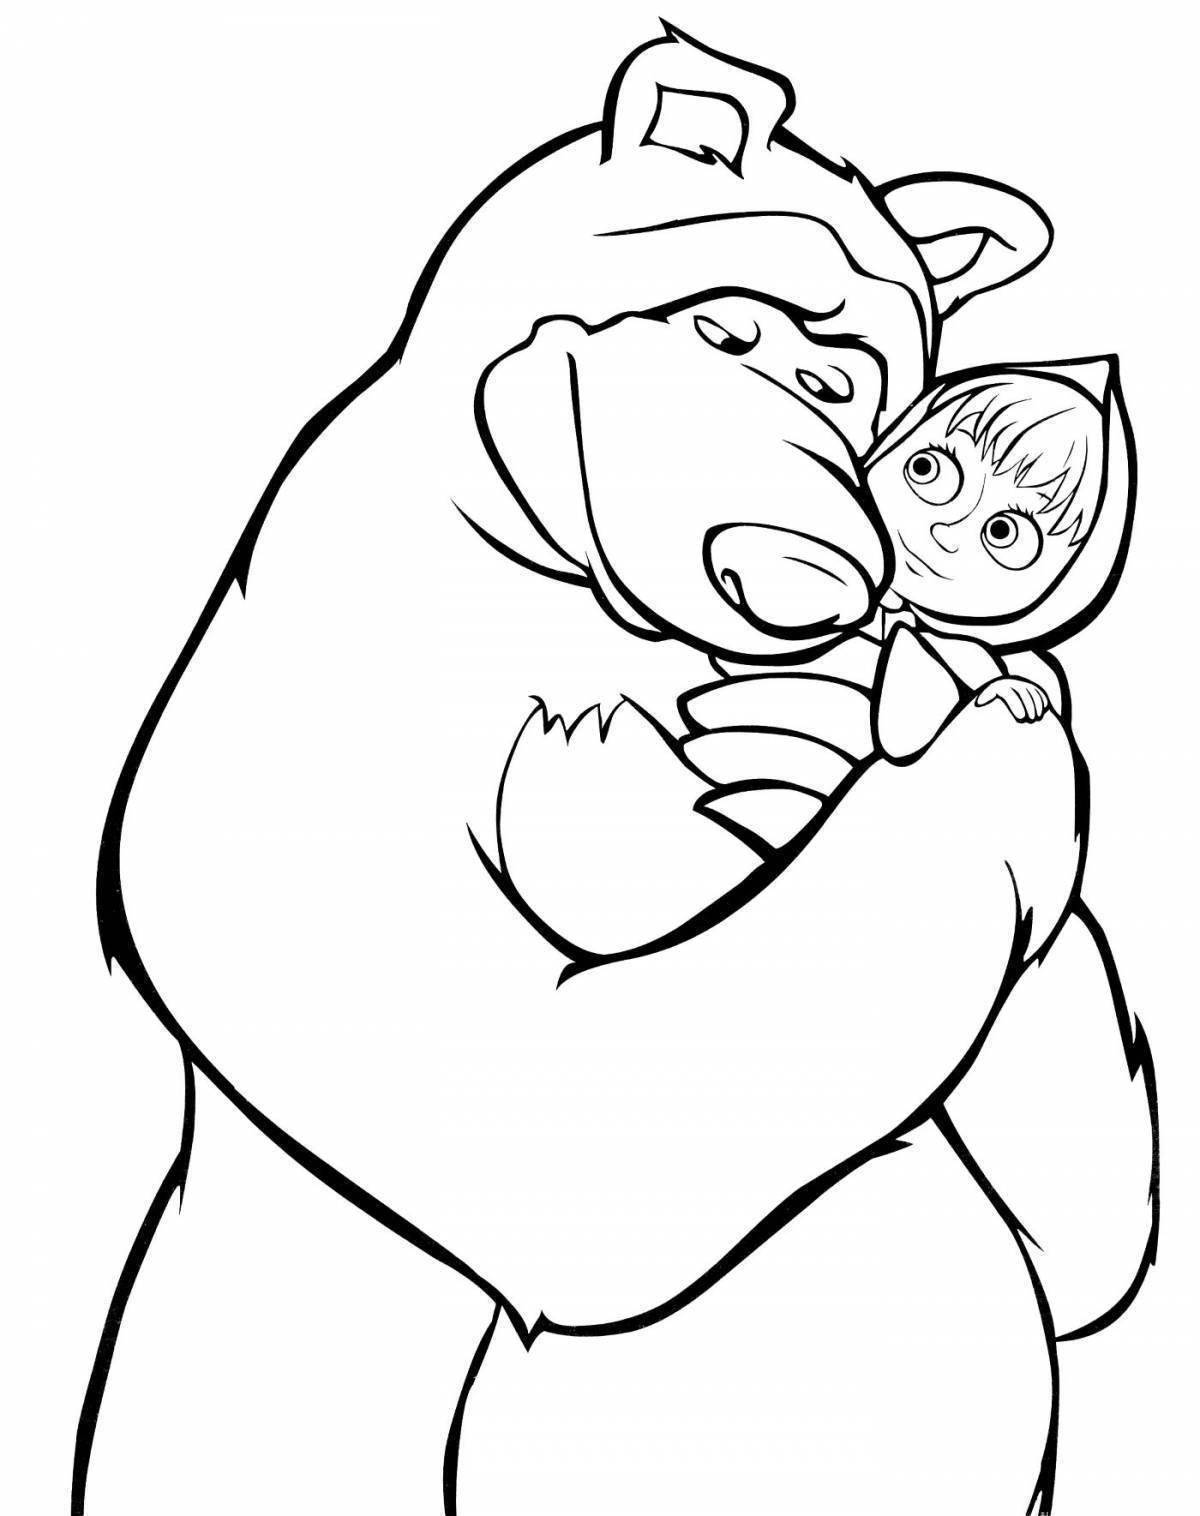 Merry Masha and the bear coloring pages for kids